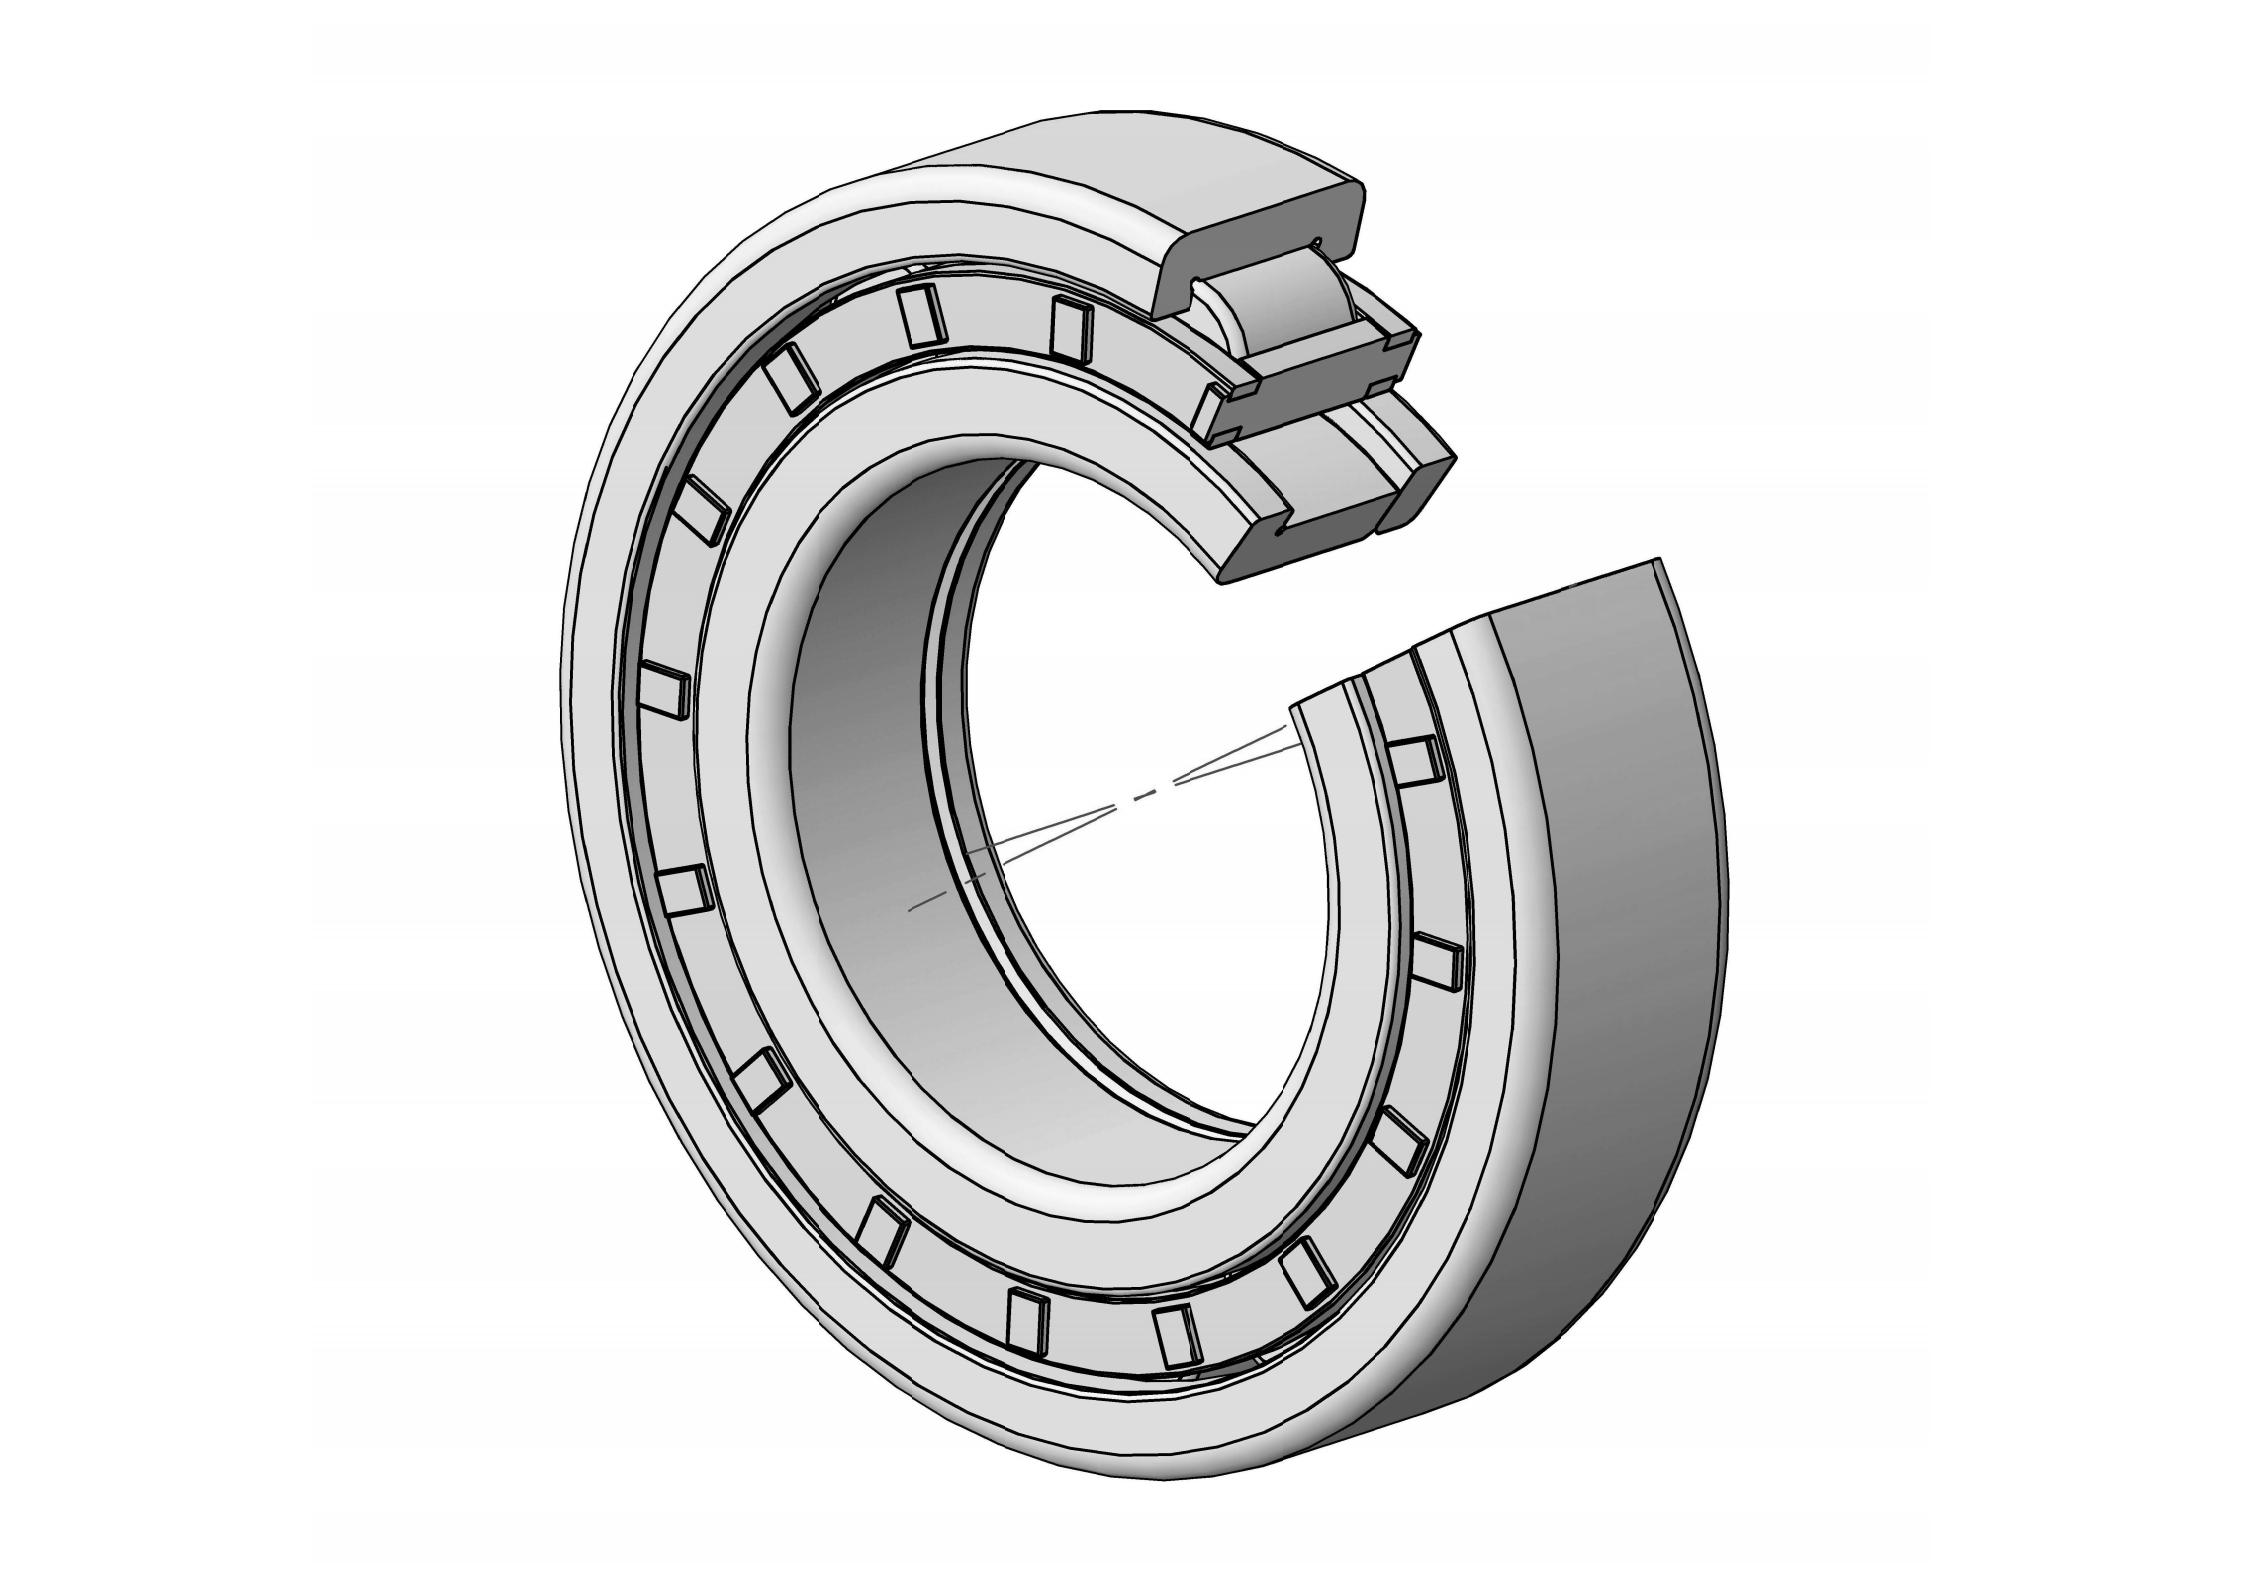 NUP2219-EM Single Row Cylindrical roller bearing